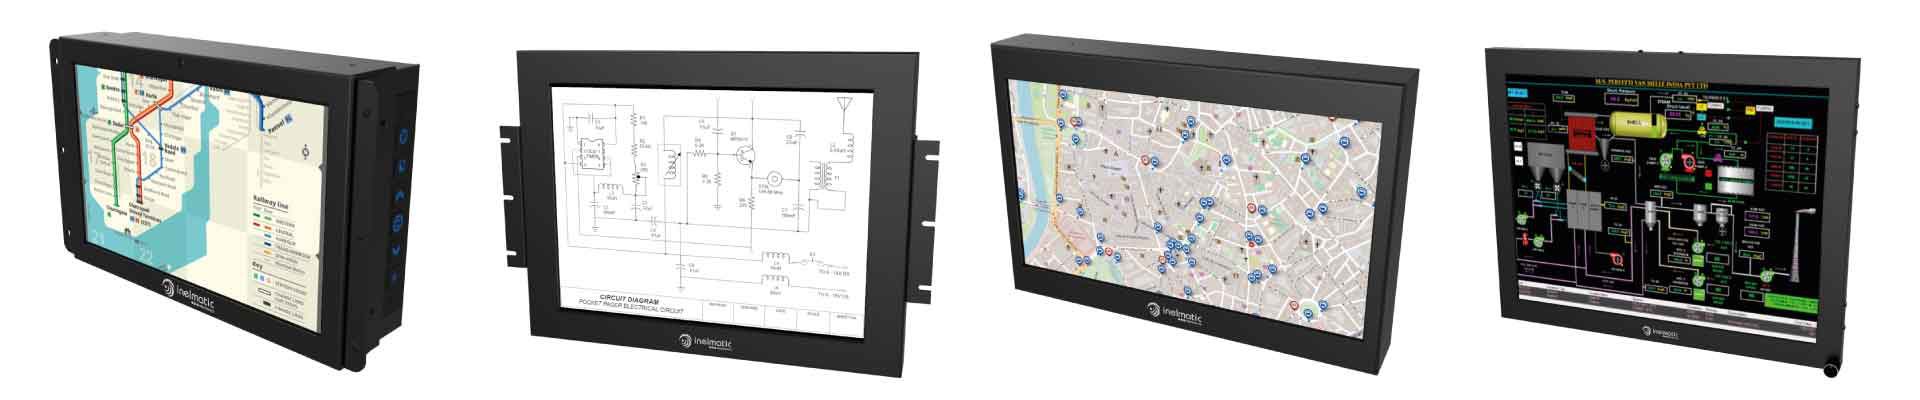 Rugged metal frame monitors for relay applications - Inelmatic